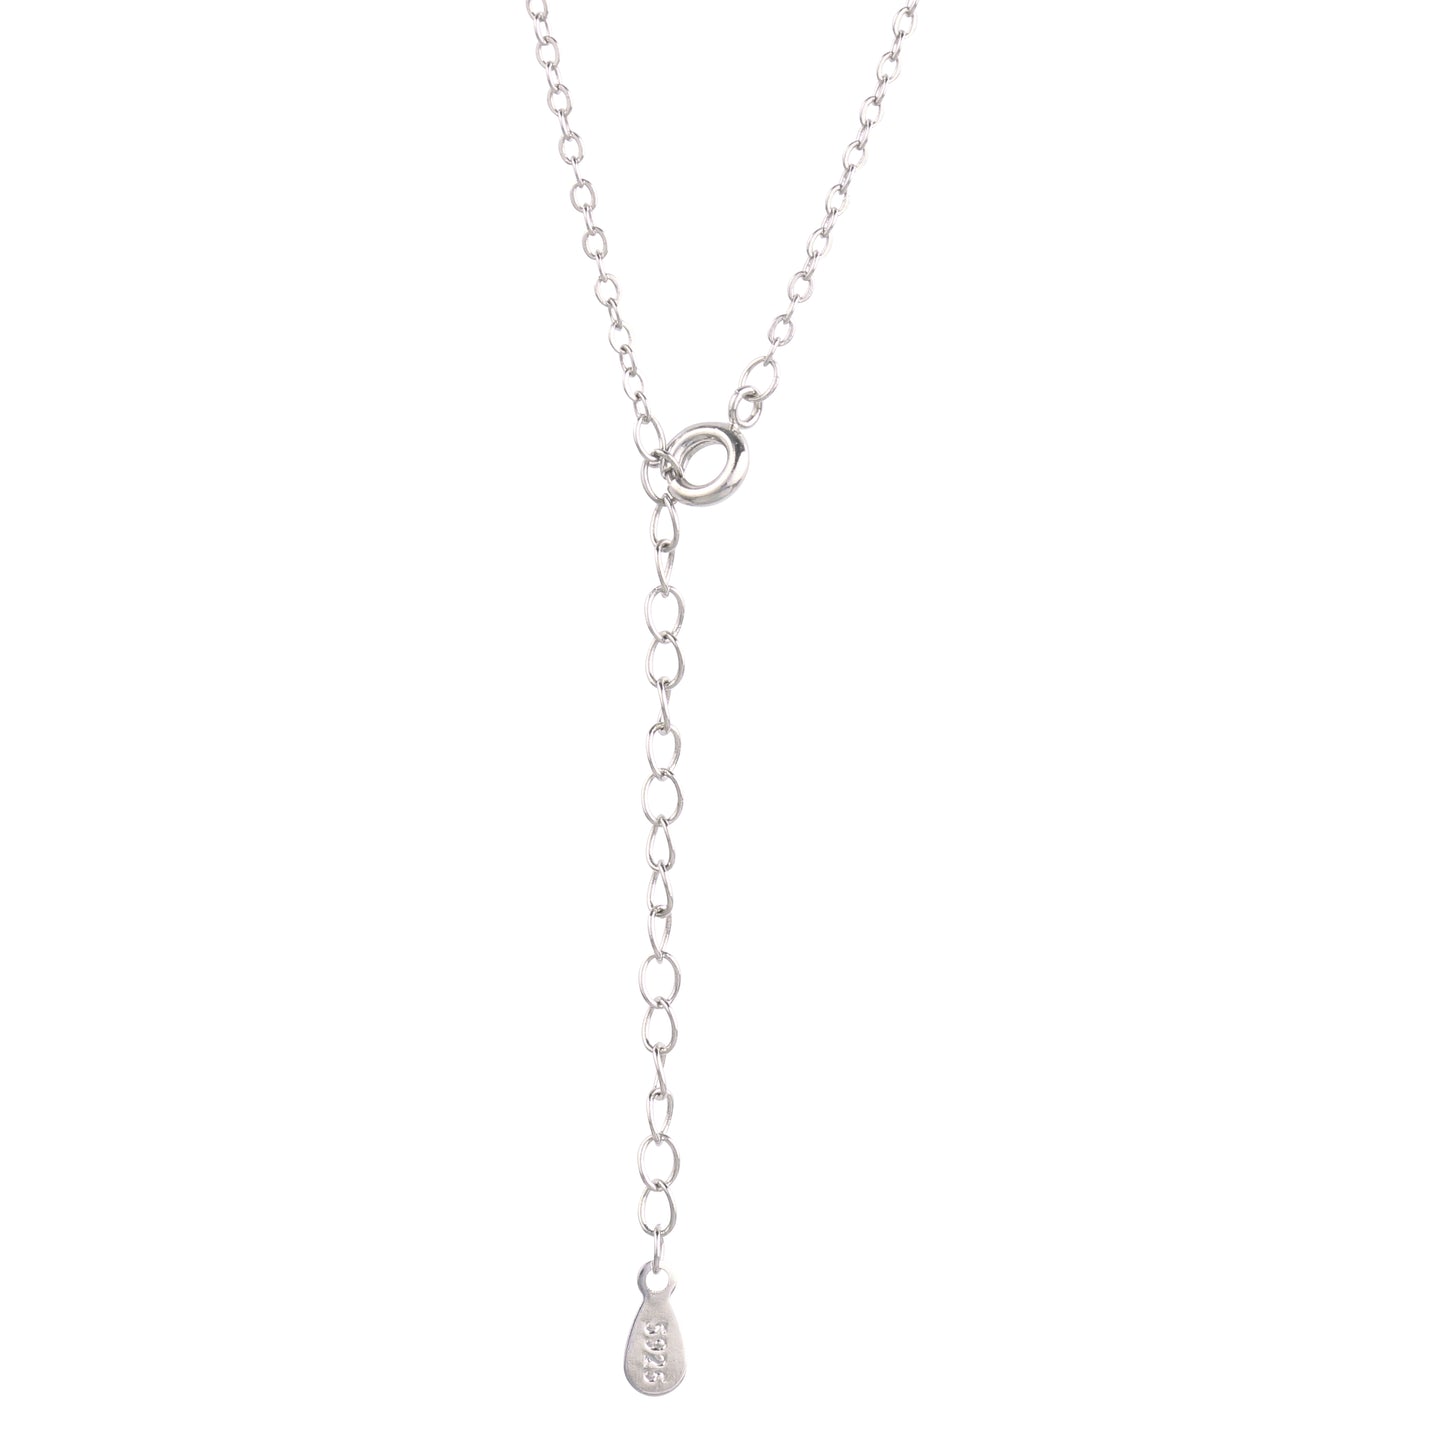 BlingStop Round Pendant Pave Necklace